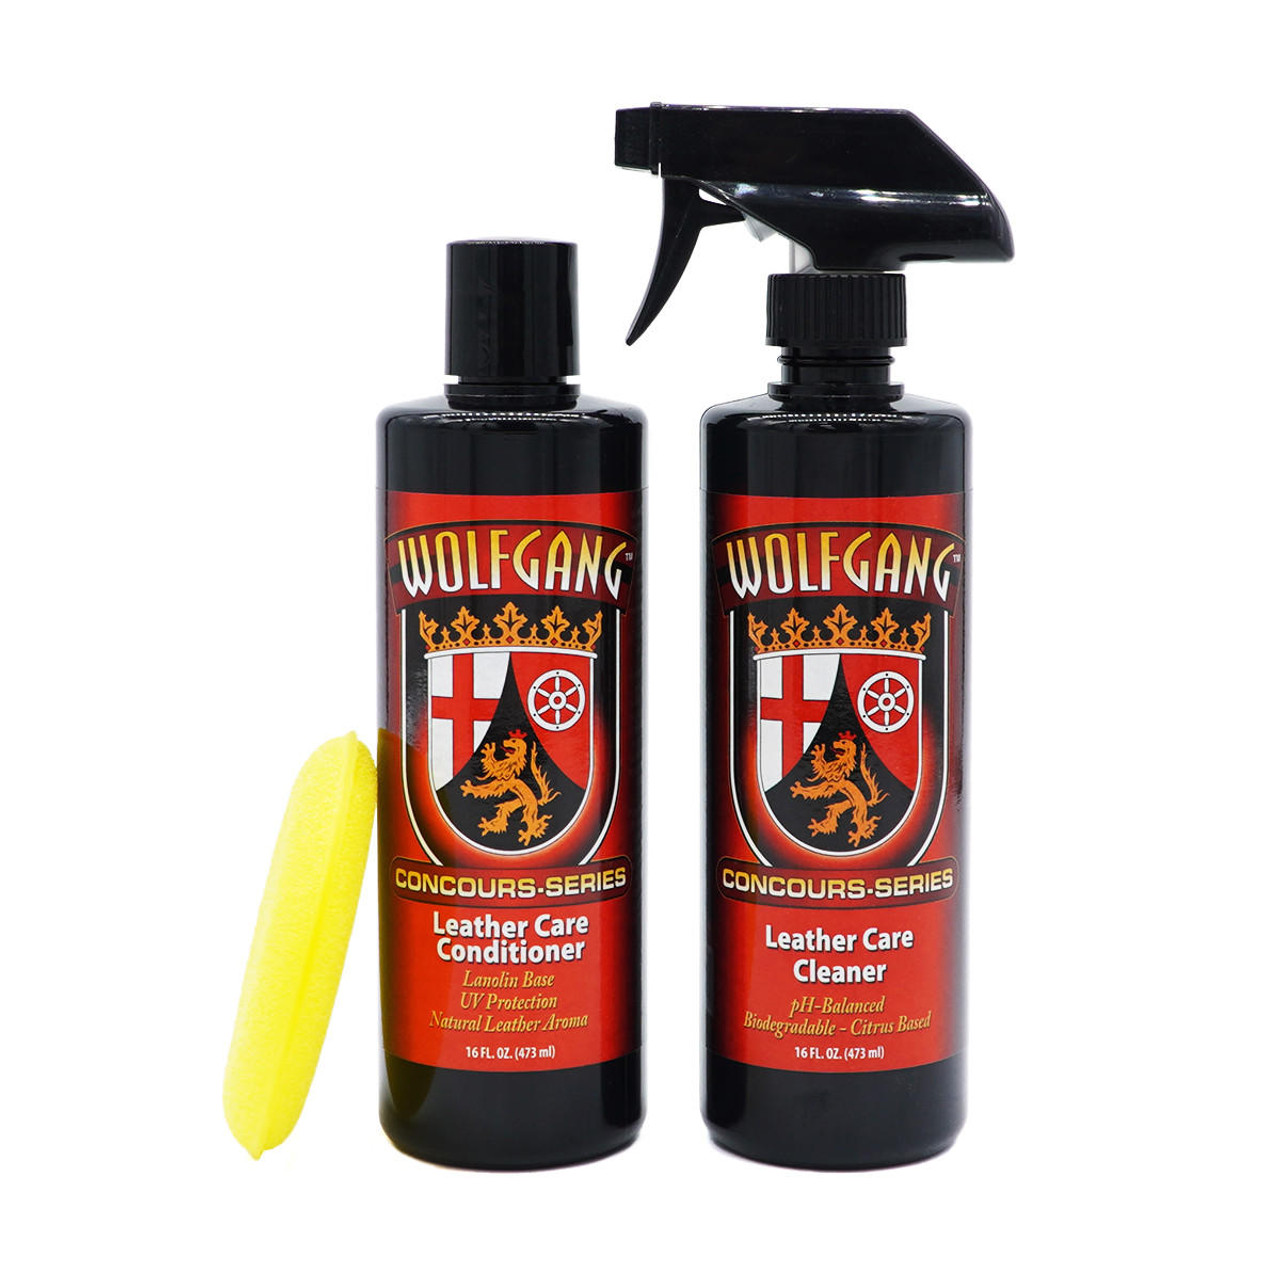 Wolfgang Leather Care Combo, Cleaner, Wolfgang Leather Wolfgang Conditioner Leather